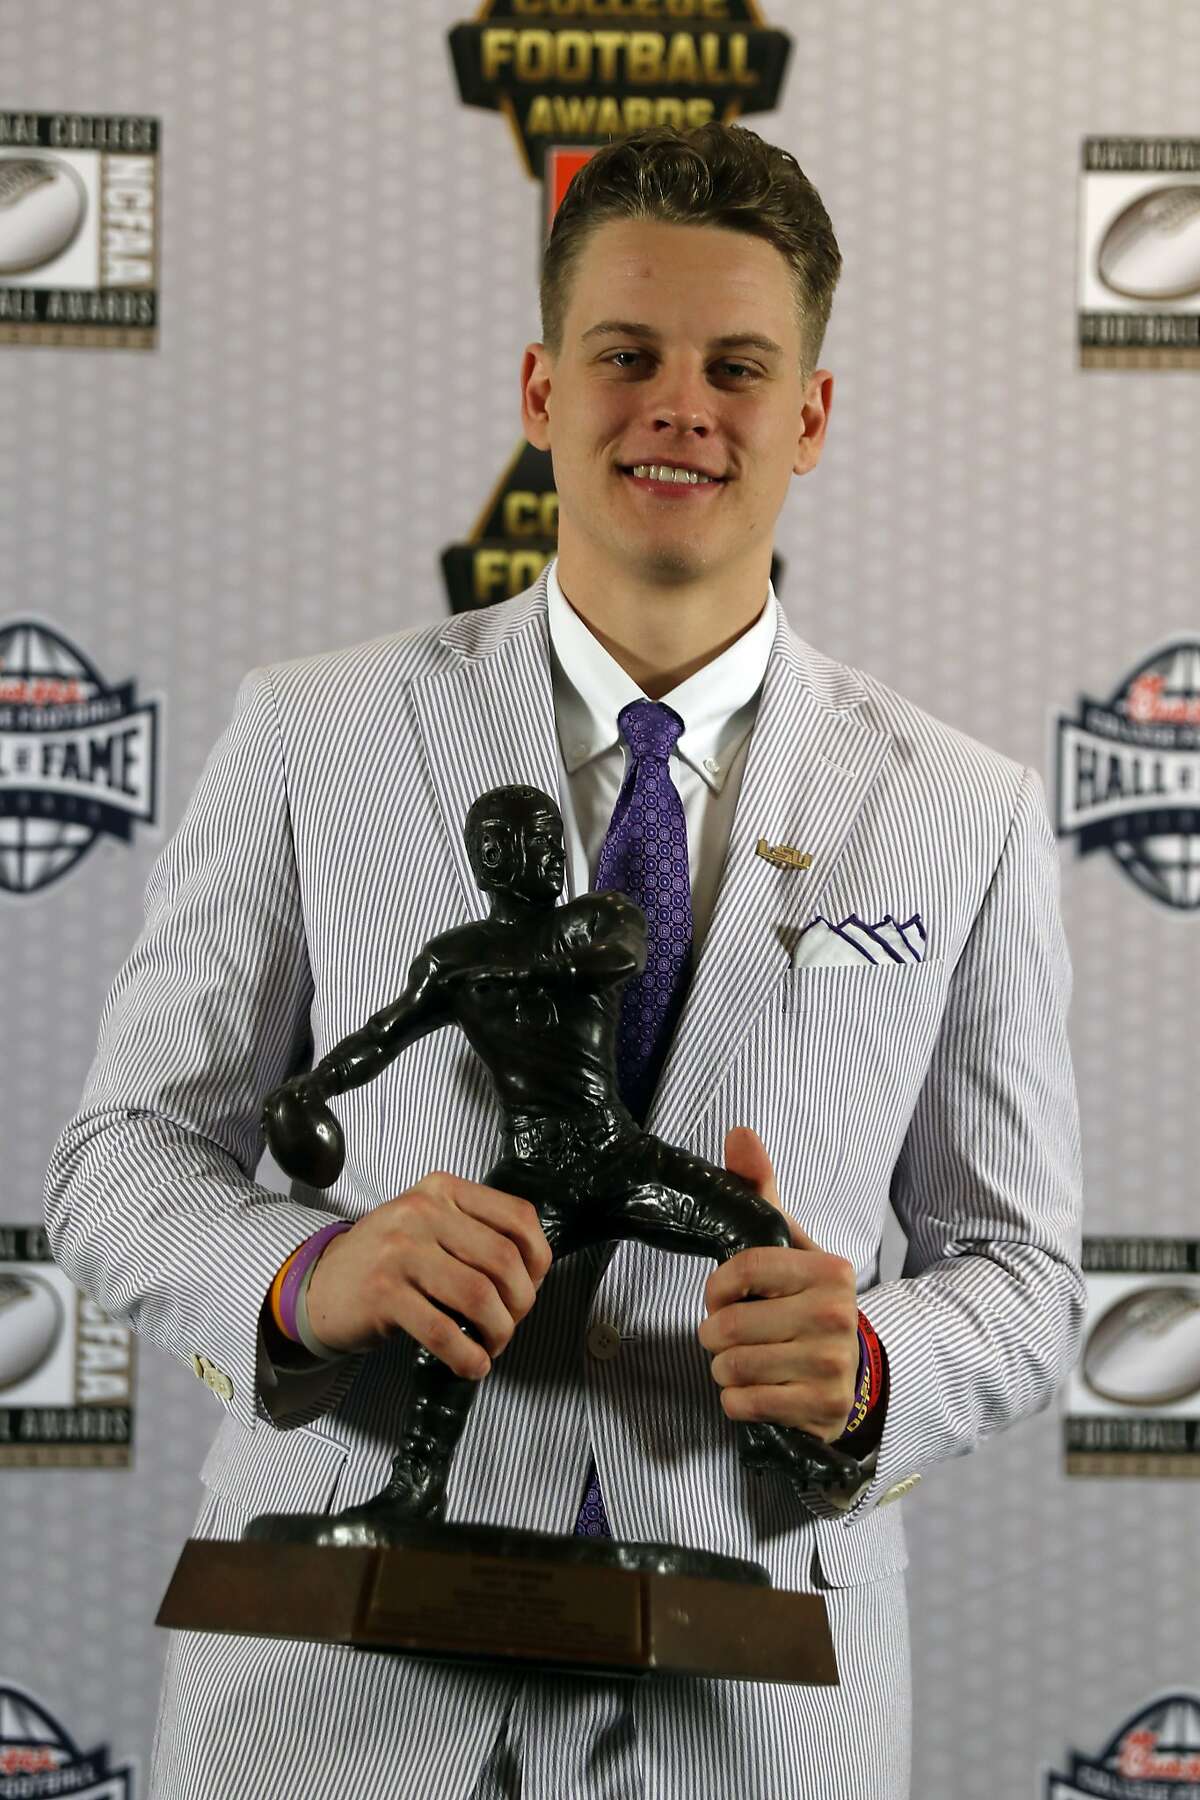 LSU quarterback Joe Burrow poses with trophy after winning the Davey O'Brien Award for being the nation's best quarterback Thursday, Dec. 12, 2019, in Atlanta. (AP Photo/John Bazemore)